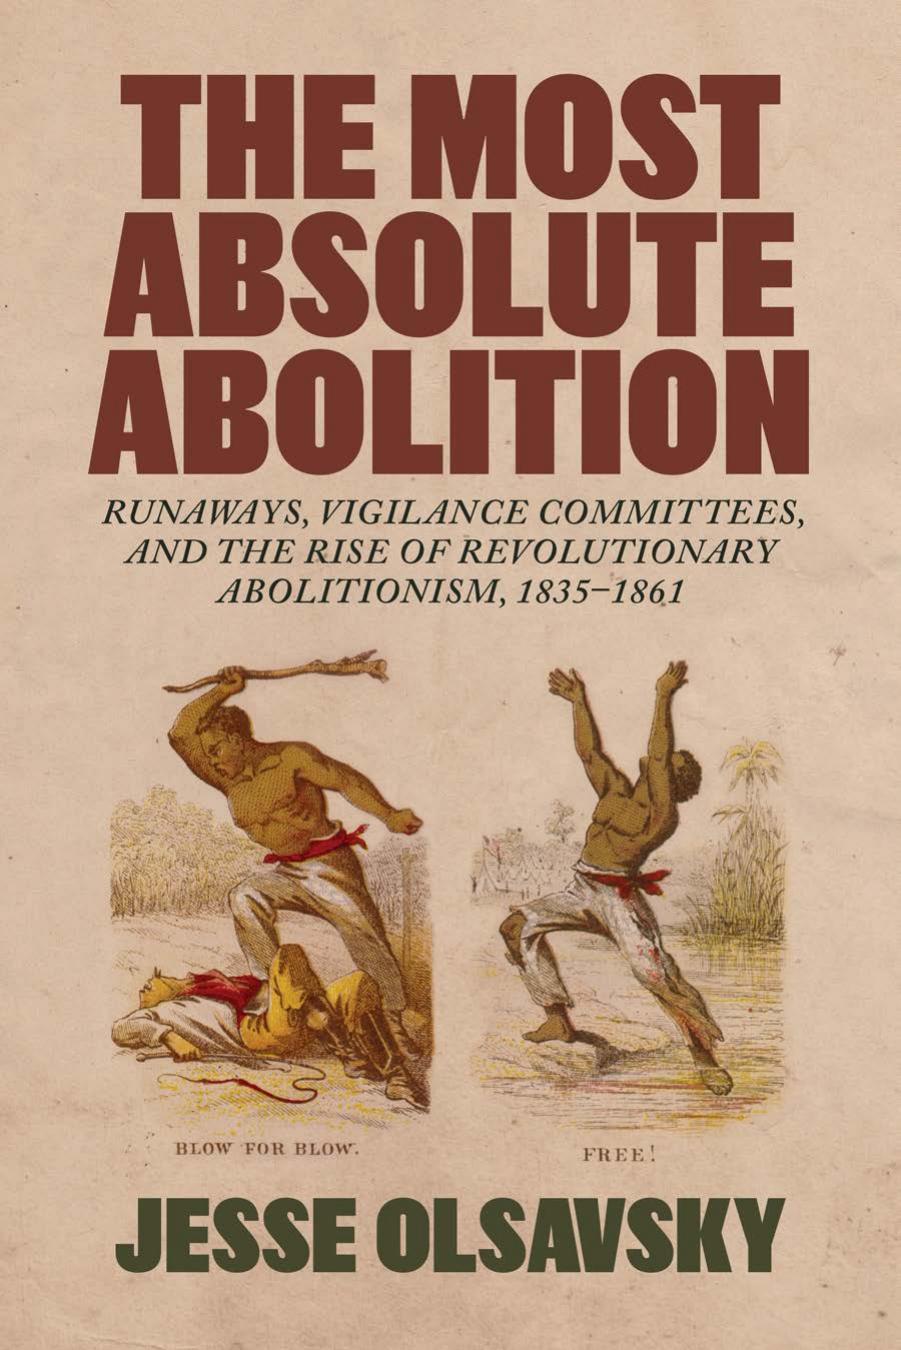 The Most Absolute Abolition: Runaways, Vigilance Committees, and the Rise of Revolutionary Abolitionism, 1835â1861 by Jesse Olsavsky